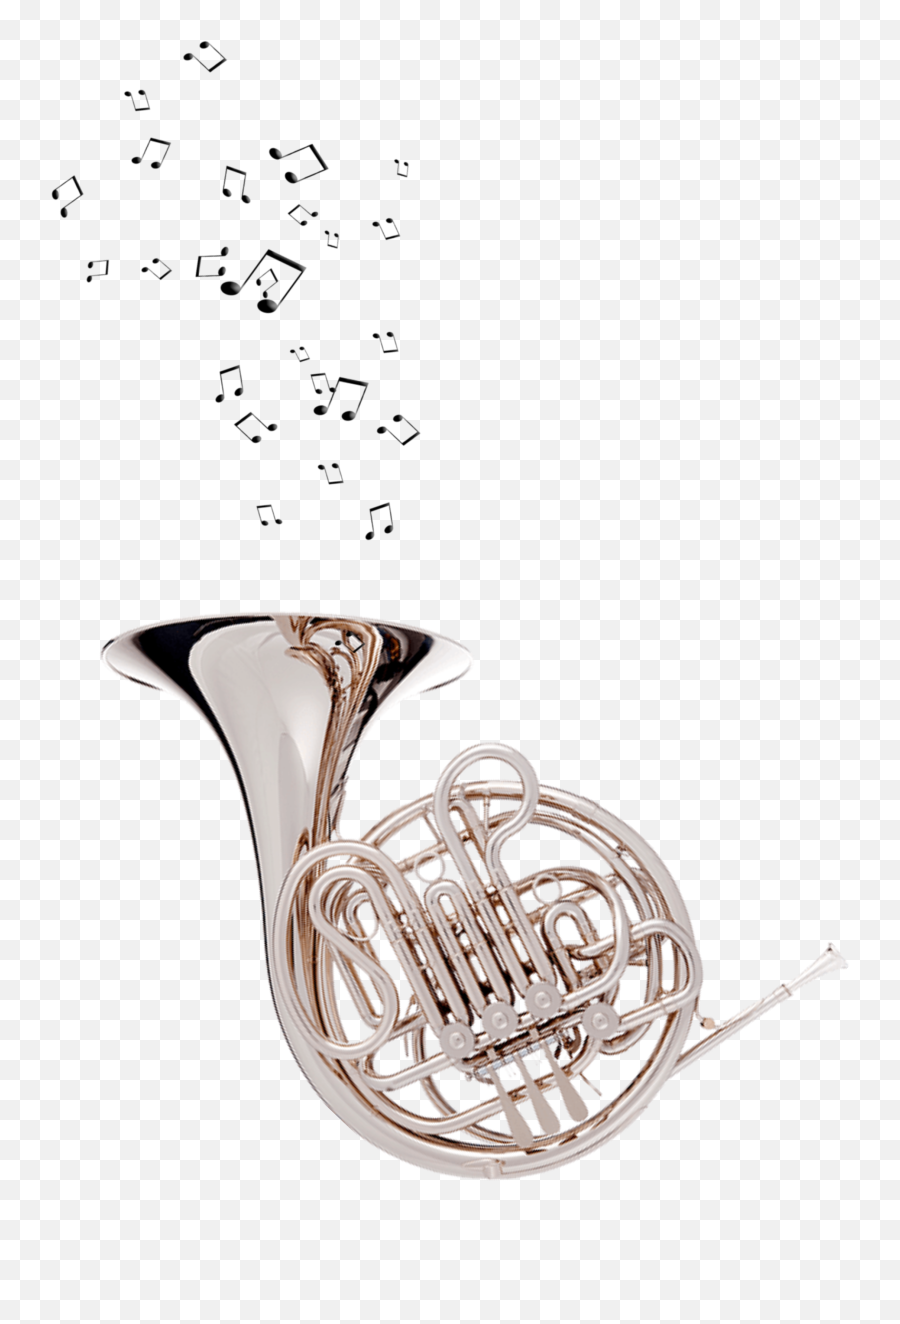 Popular And Trending Frenchhorn Stickers On Picsart - Horn Emoji,French Horn Emoji